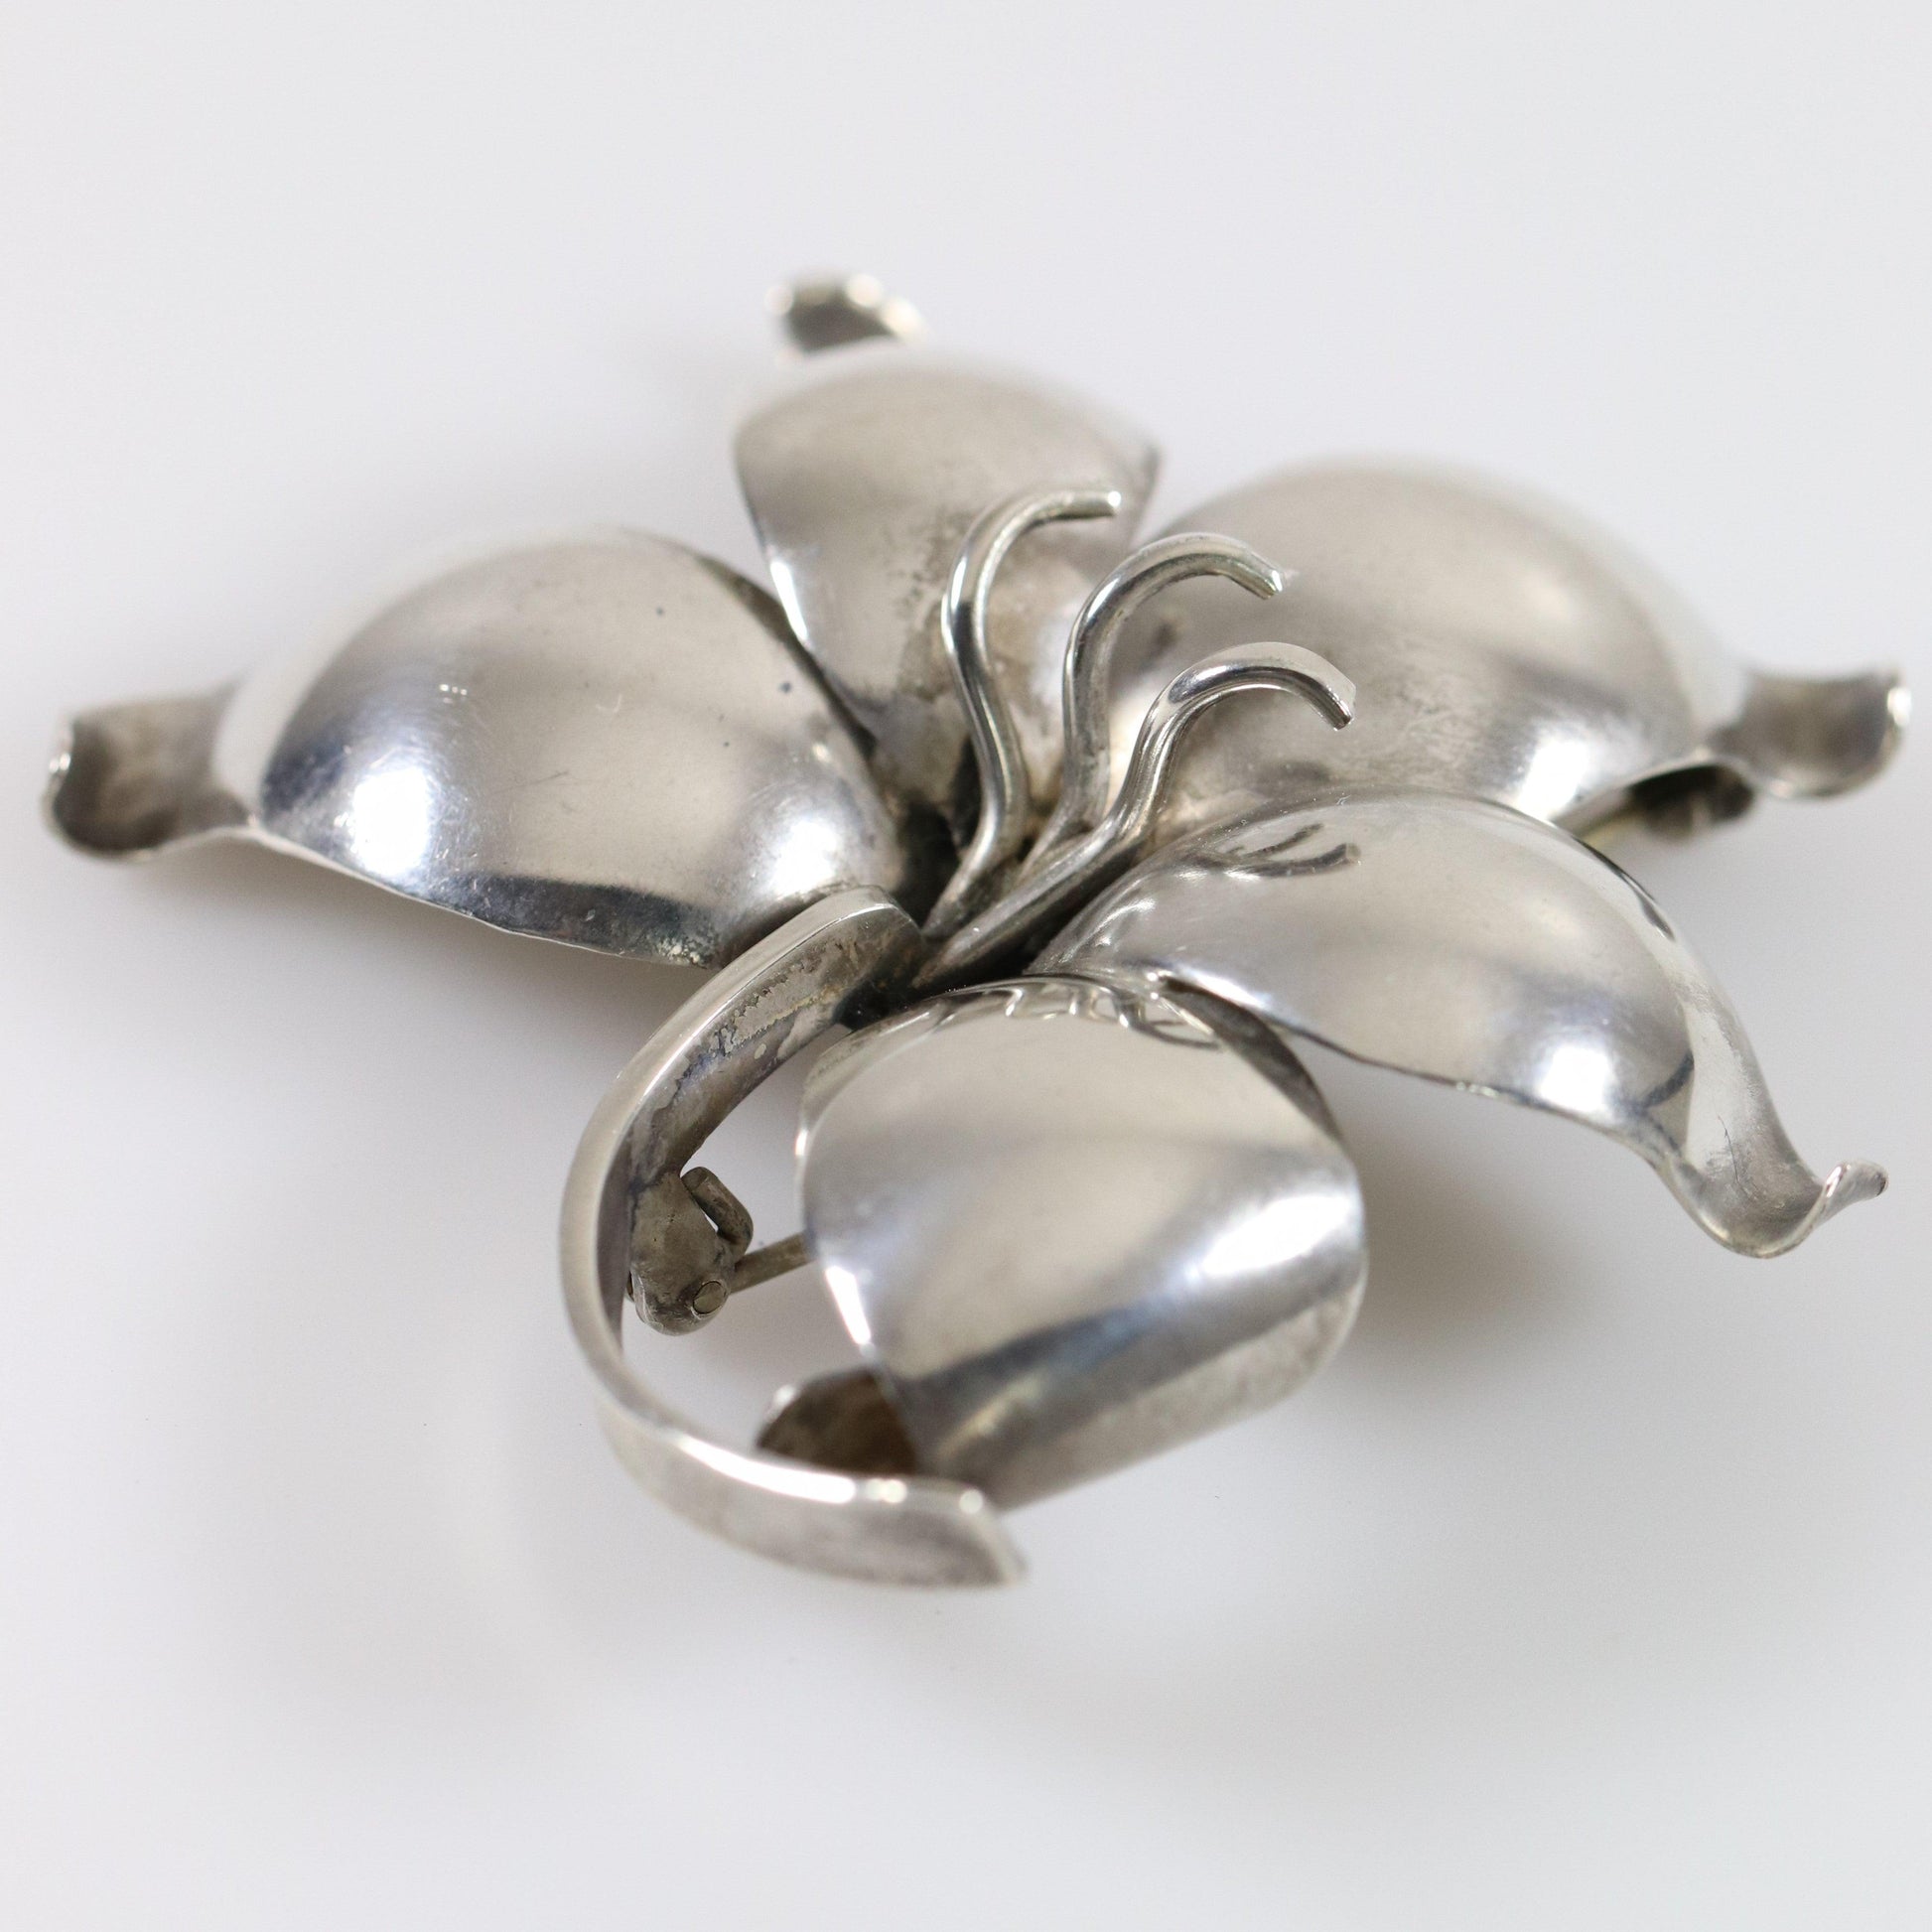 Vintage Danish E Dagsted Sterling Silver Jewelry | Floral Modernist Mid-Century Brooch - Carmel Fine Silver Jewelry